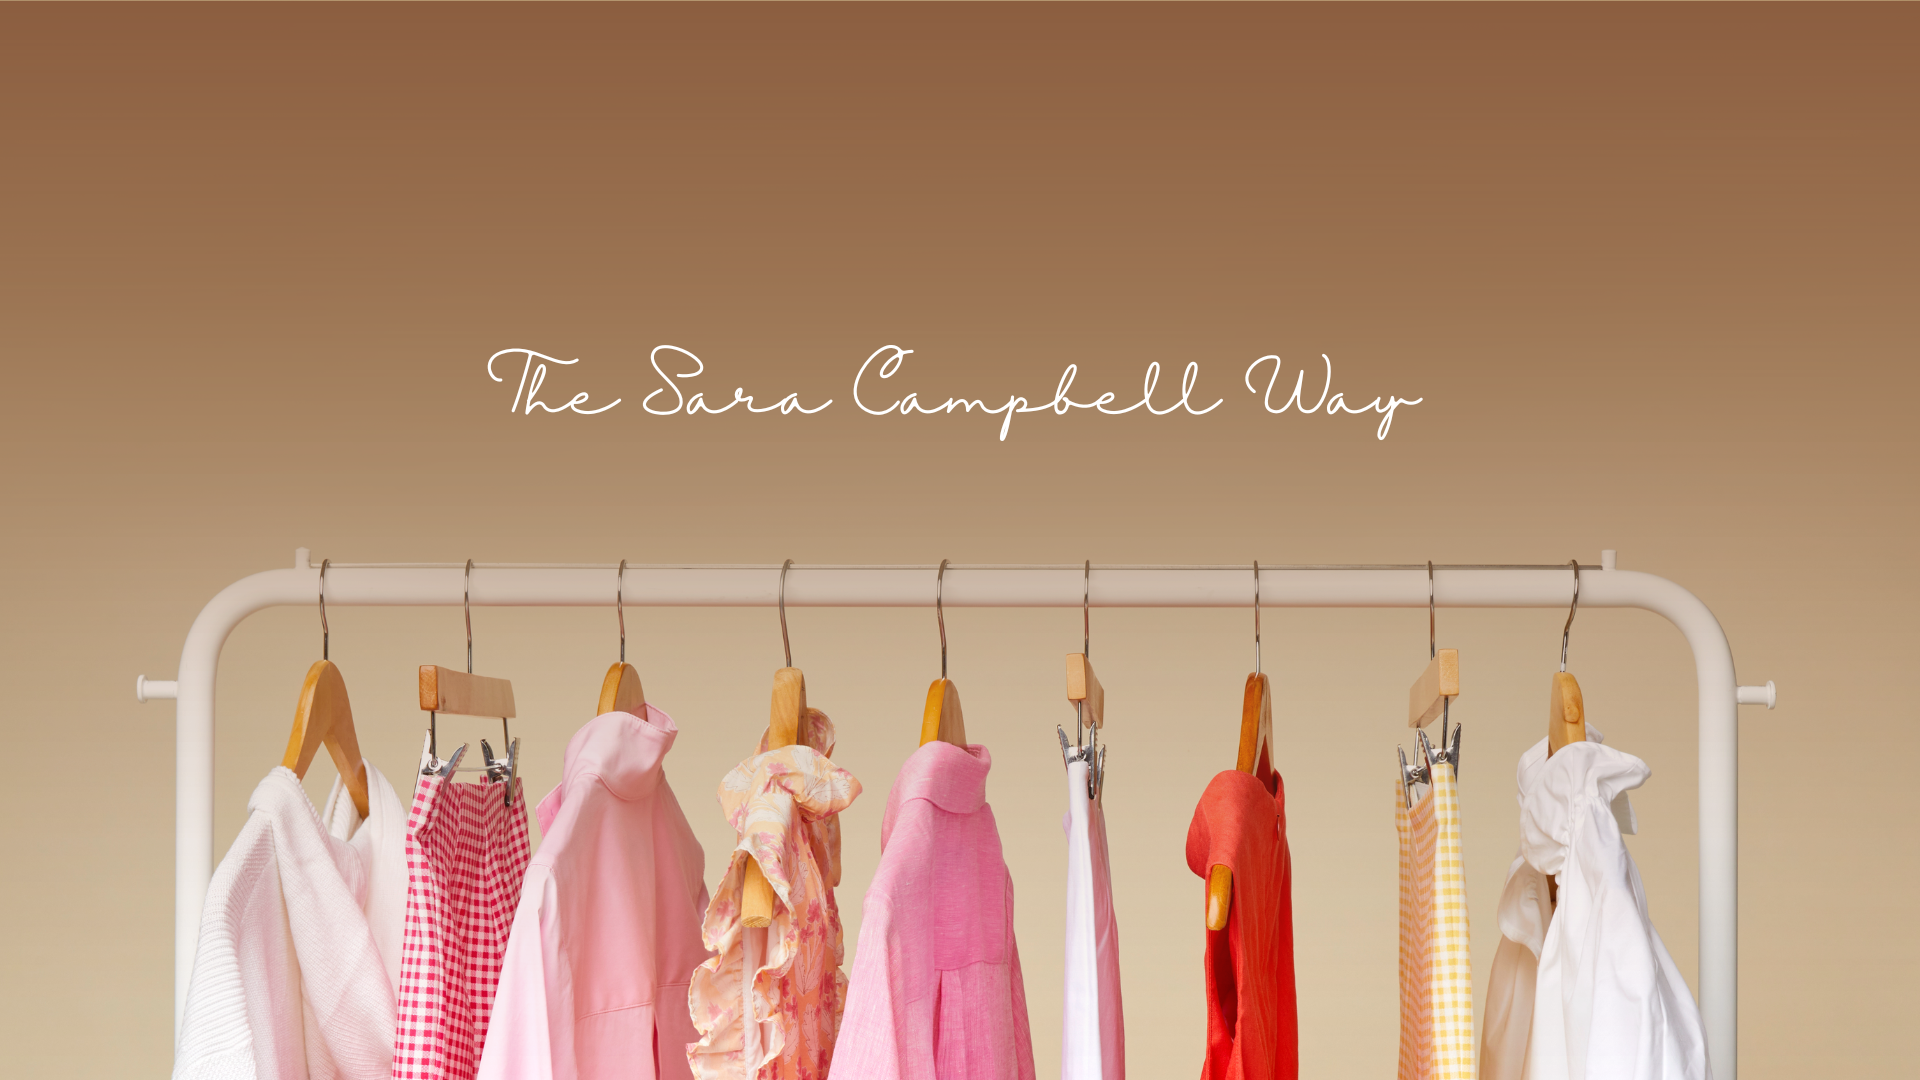 Photo of a clothing rack with "The Sara Campbell Way" Written above. 